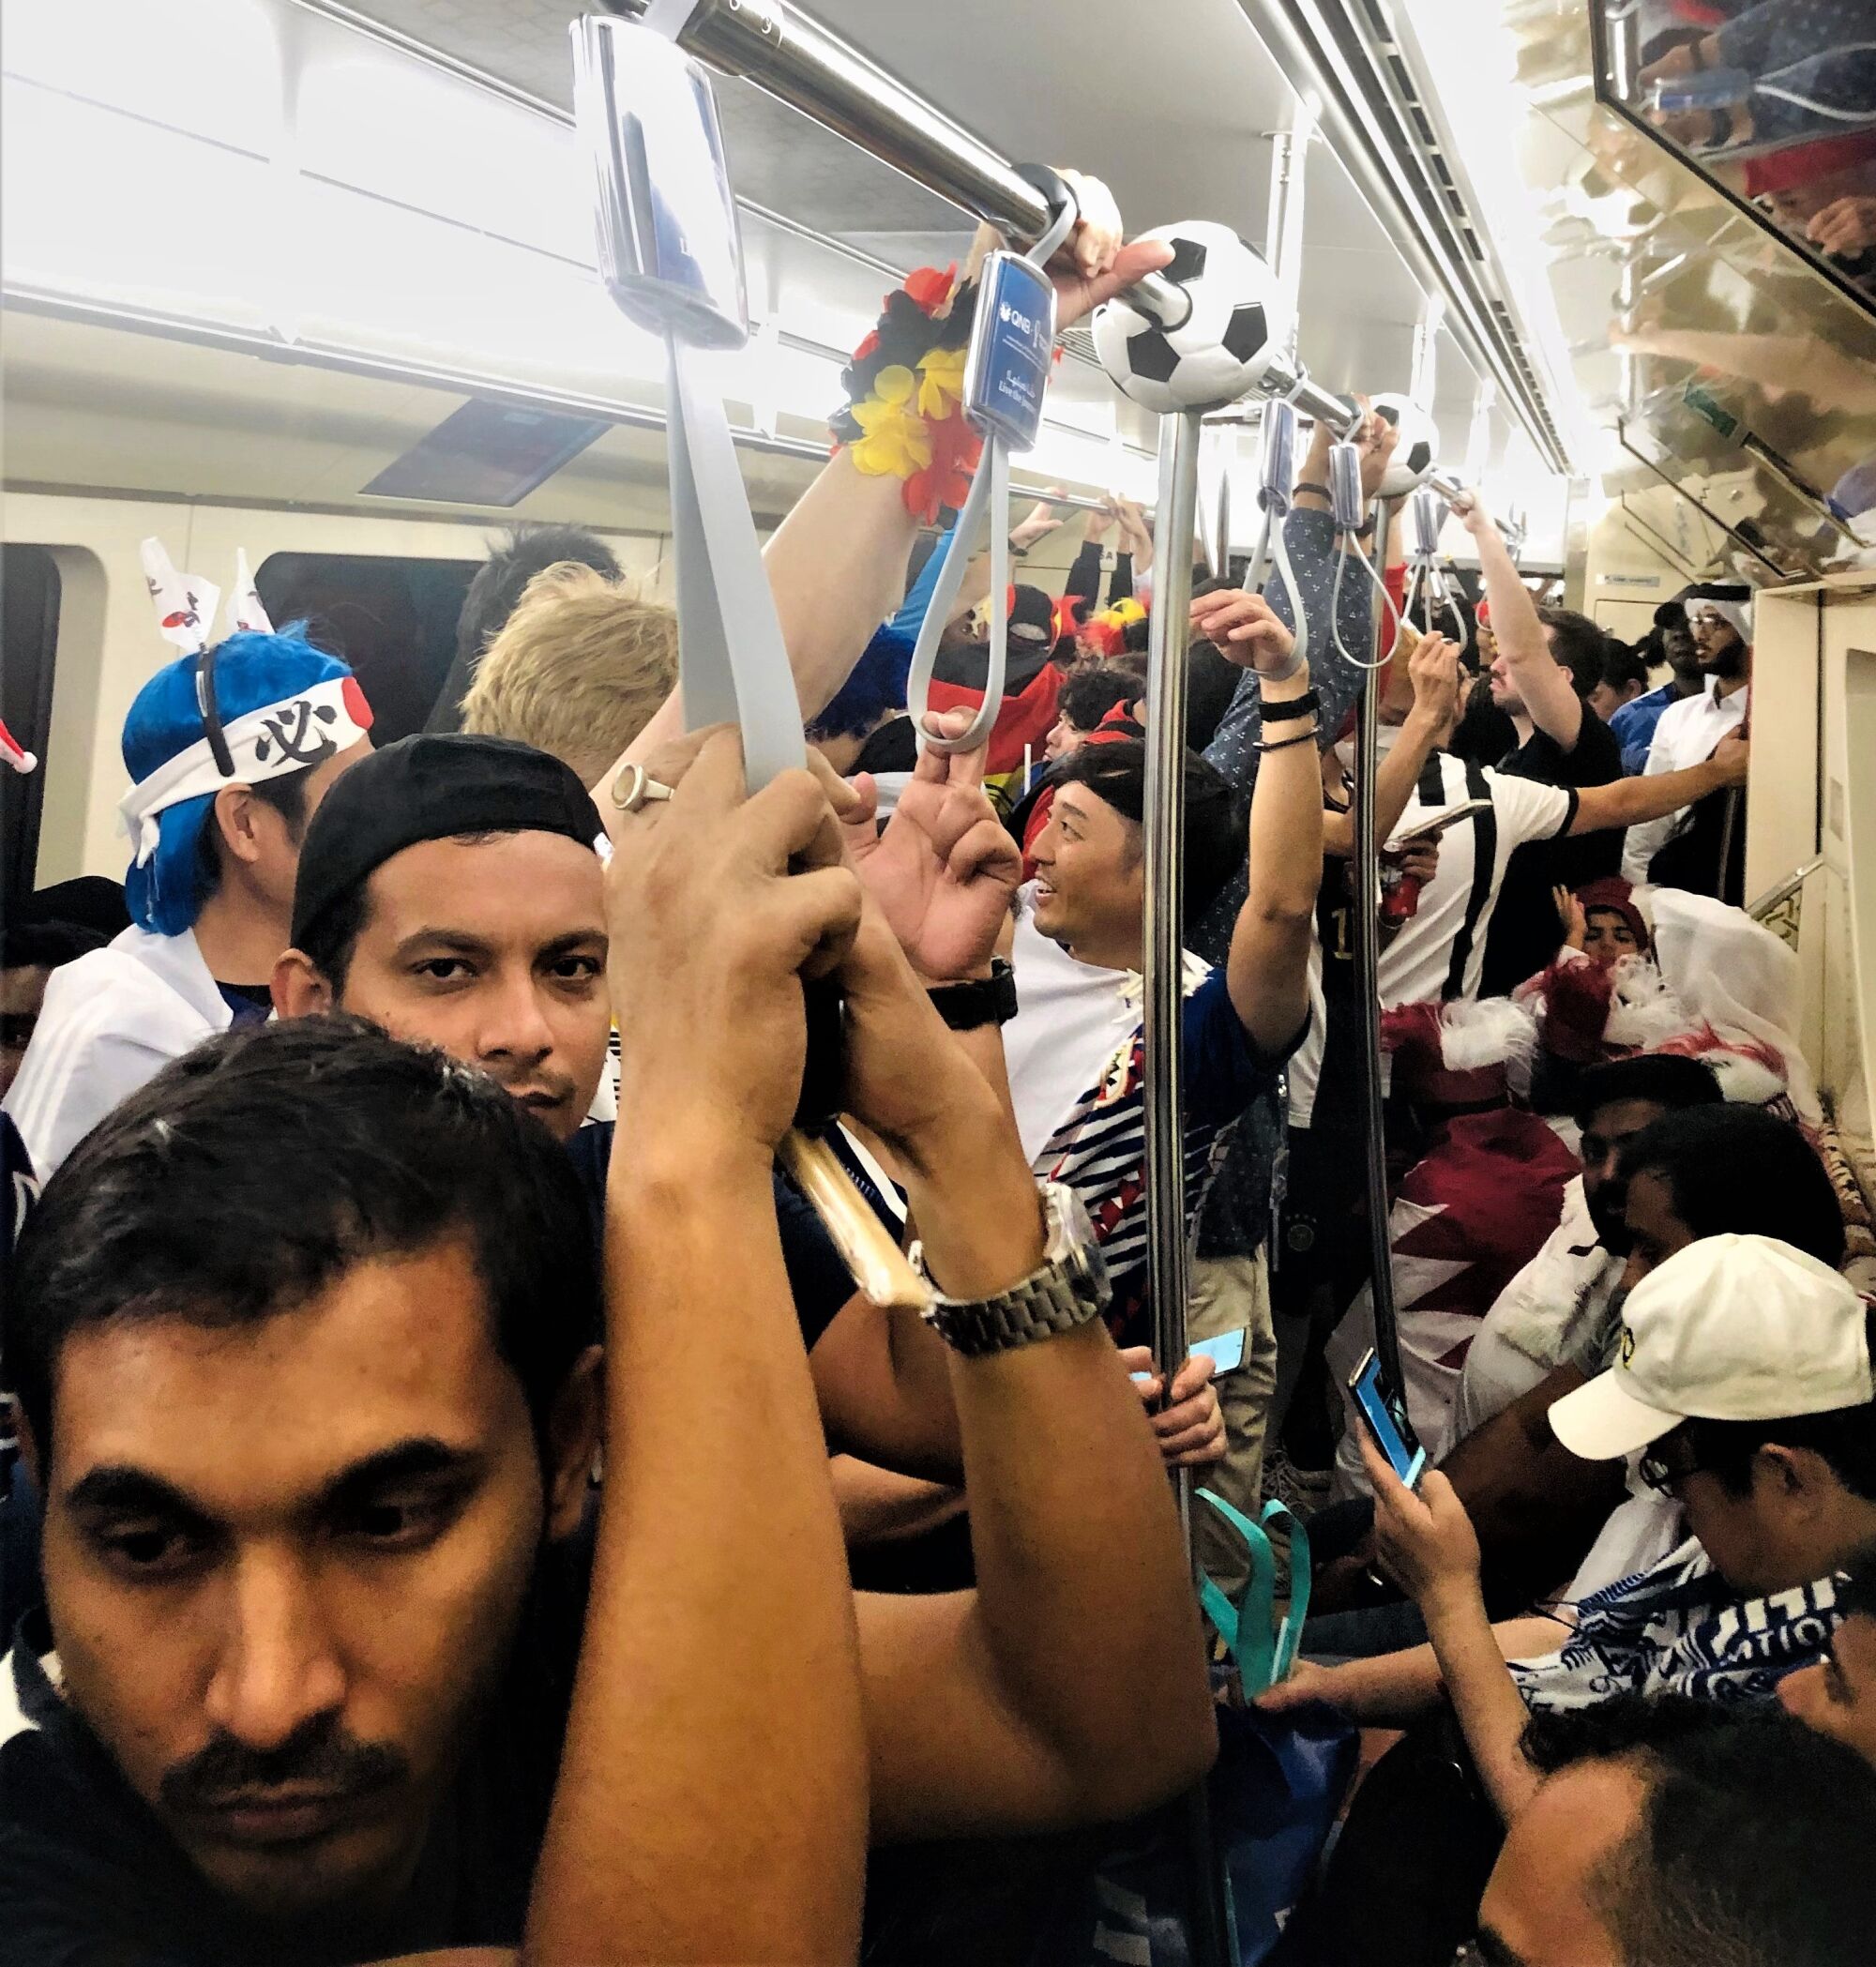 World Cup fans stand on a crowded metro train Wednesday in Qatar.